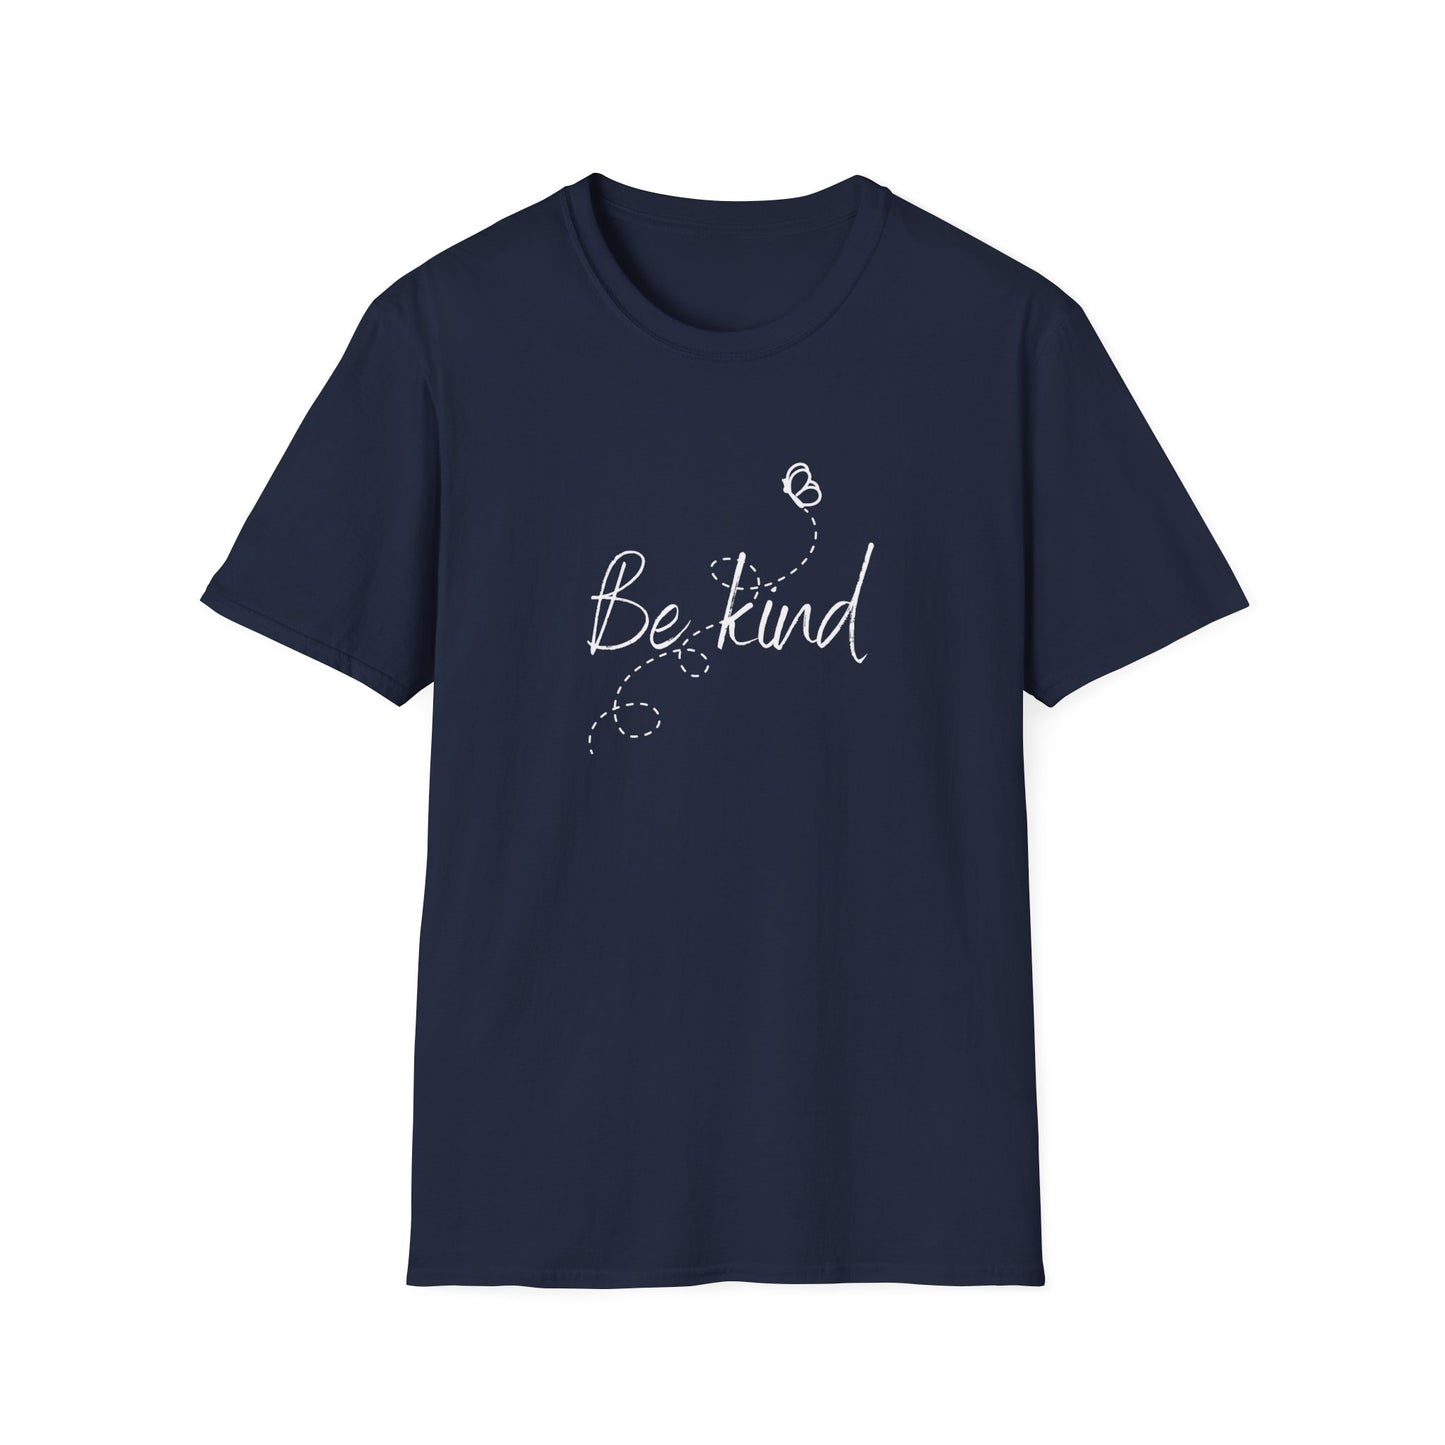 BE KIND CLASSIC FIT T-SHIRT